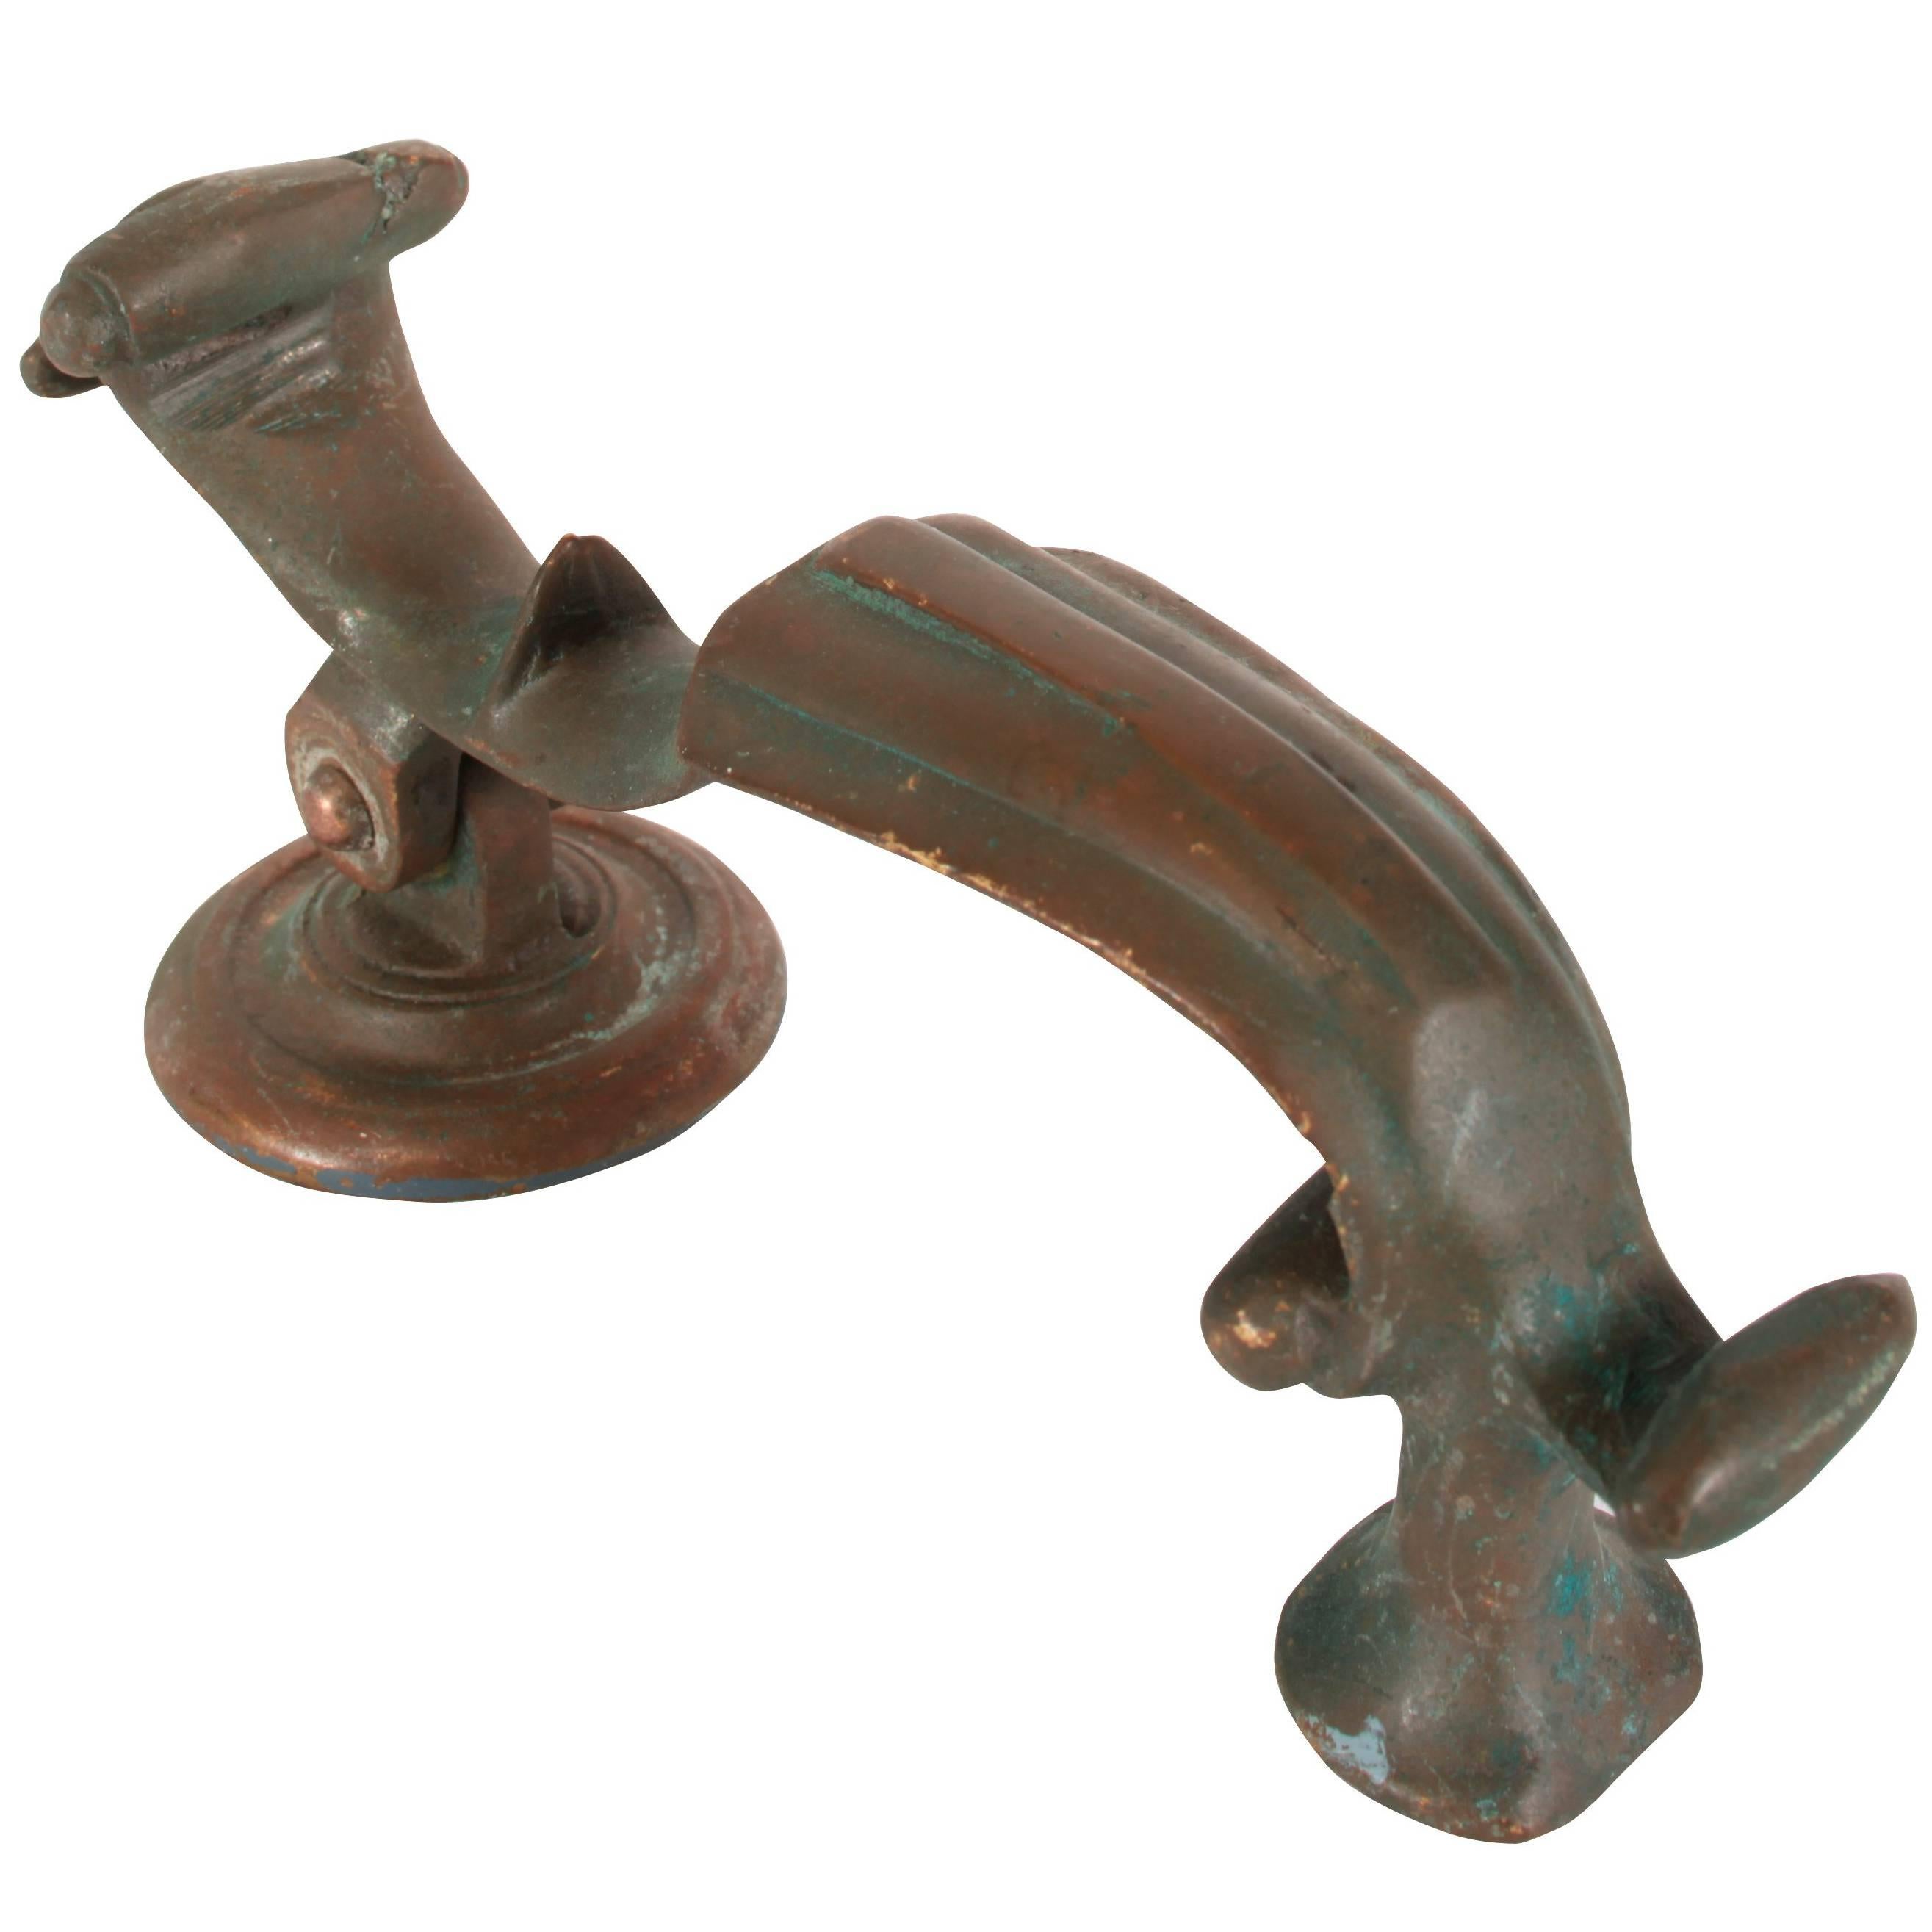 A Georgian style brass doctor's door knocker with typical s-shaped scrolled rapper, wonderful character and aged patina. Strike plate is not original.
Search term: Edwardian style, victorian style, Federal style.